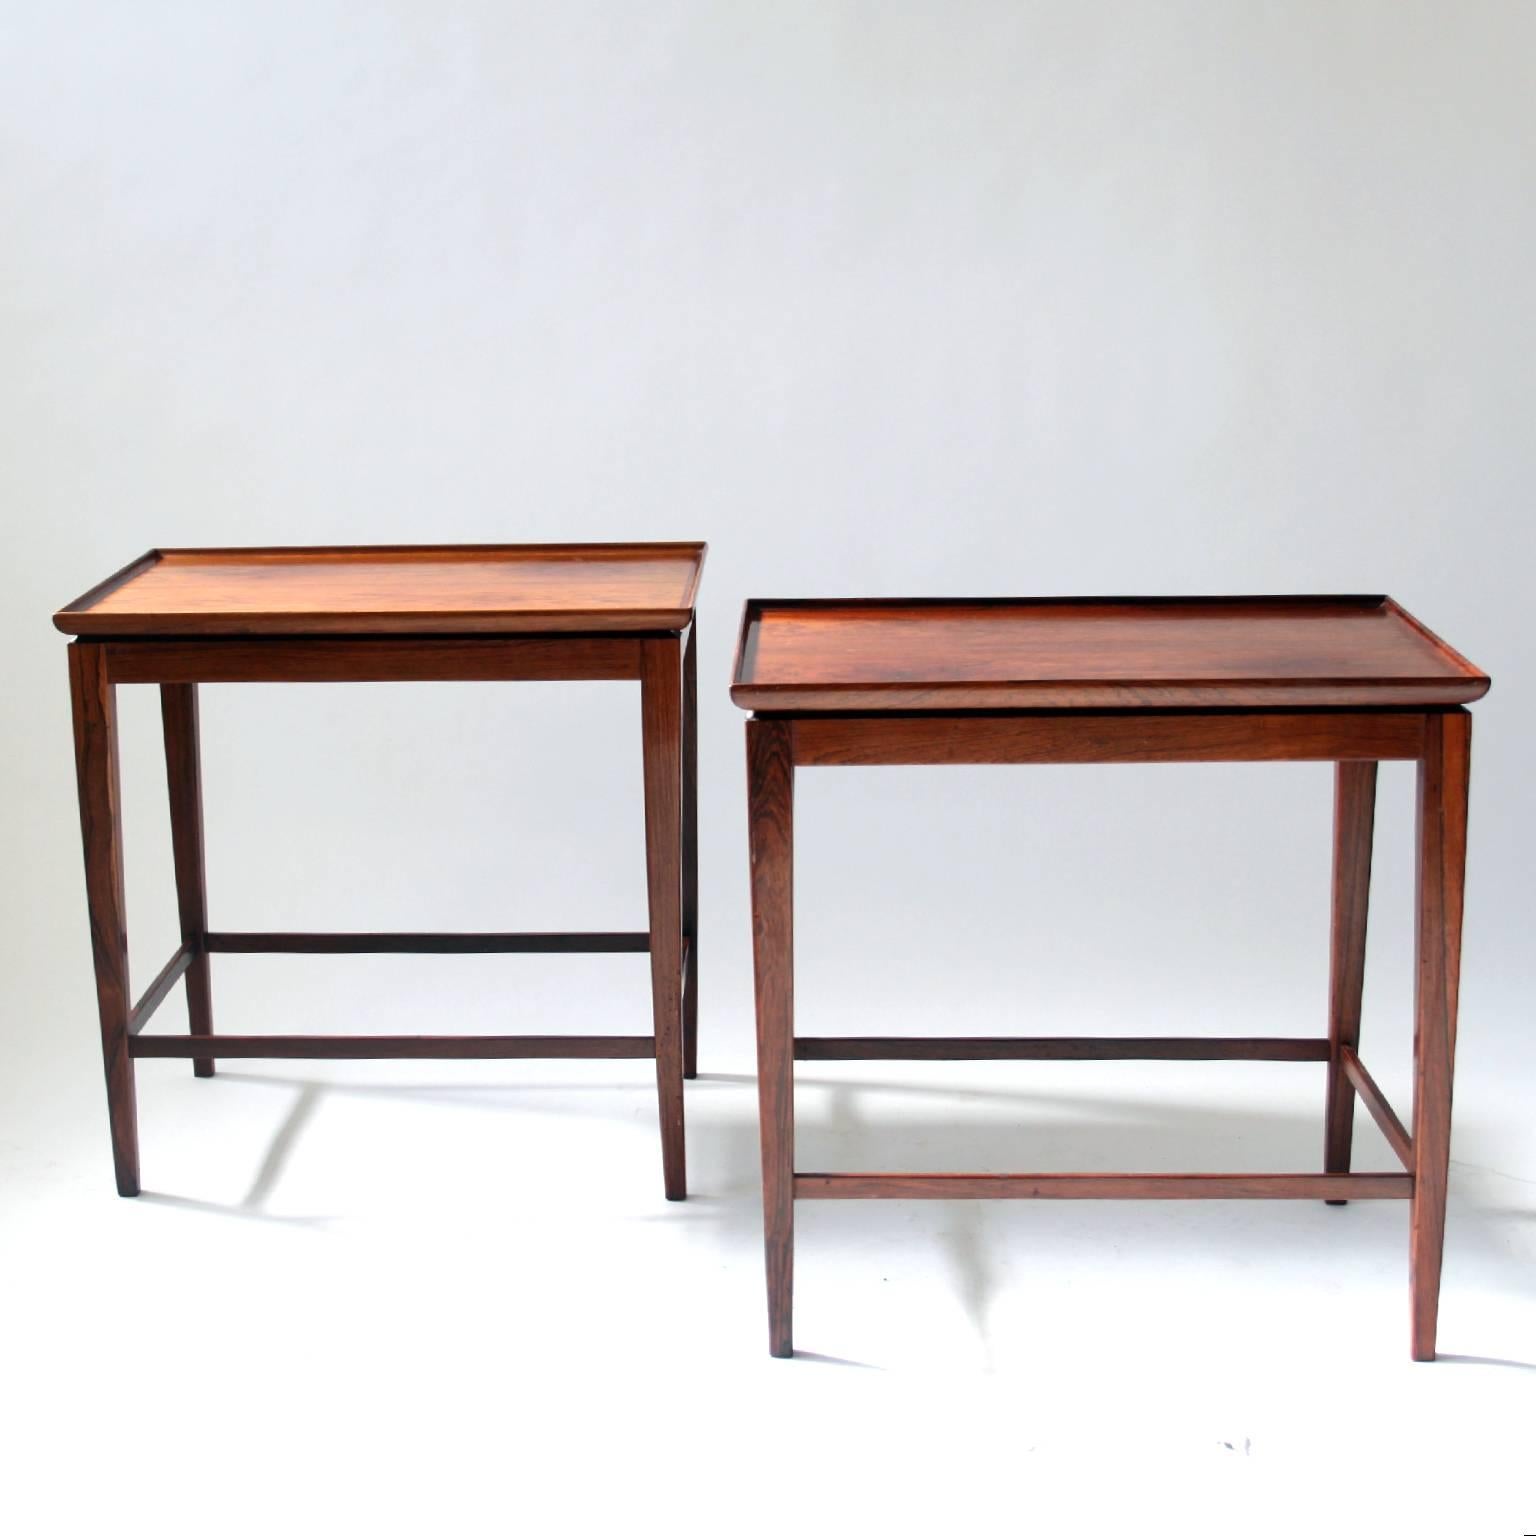 CABINETMAKER JACOB KJÆR  - SCANDINAVIAN MODERN

A beautiful pair of lamp tables or bedside tables by the Danish Cabinetmaker Jacob Kjær. 

The side tables are made of rosewood in 1950s. They are beautifully handcrafted with raised table edges and